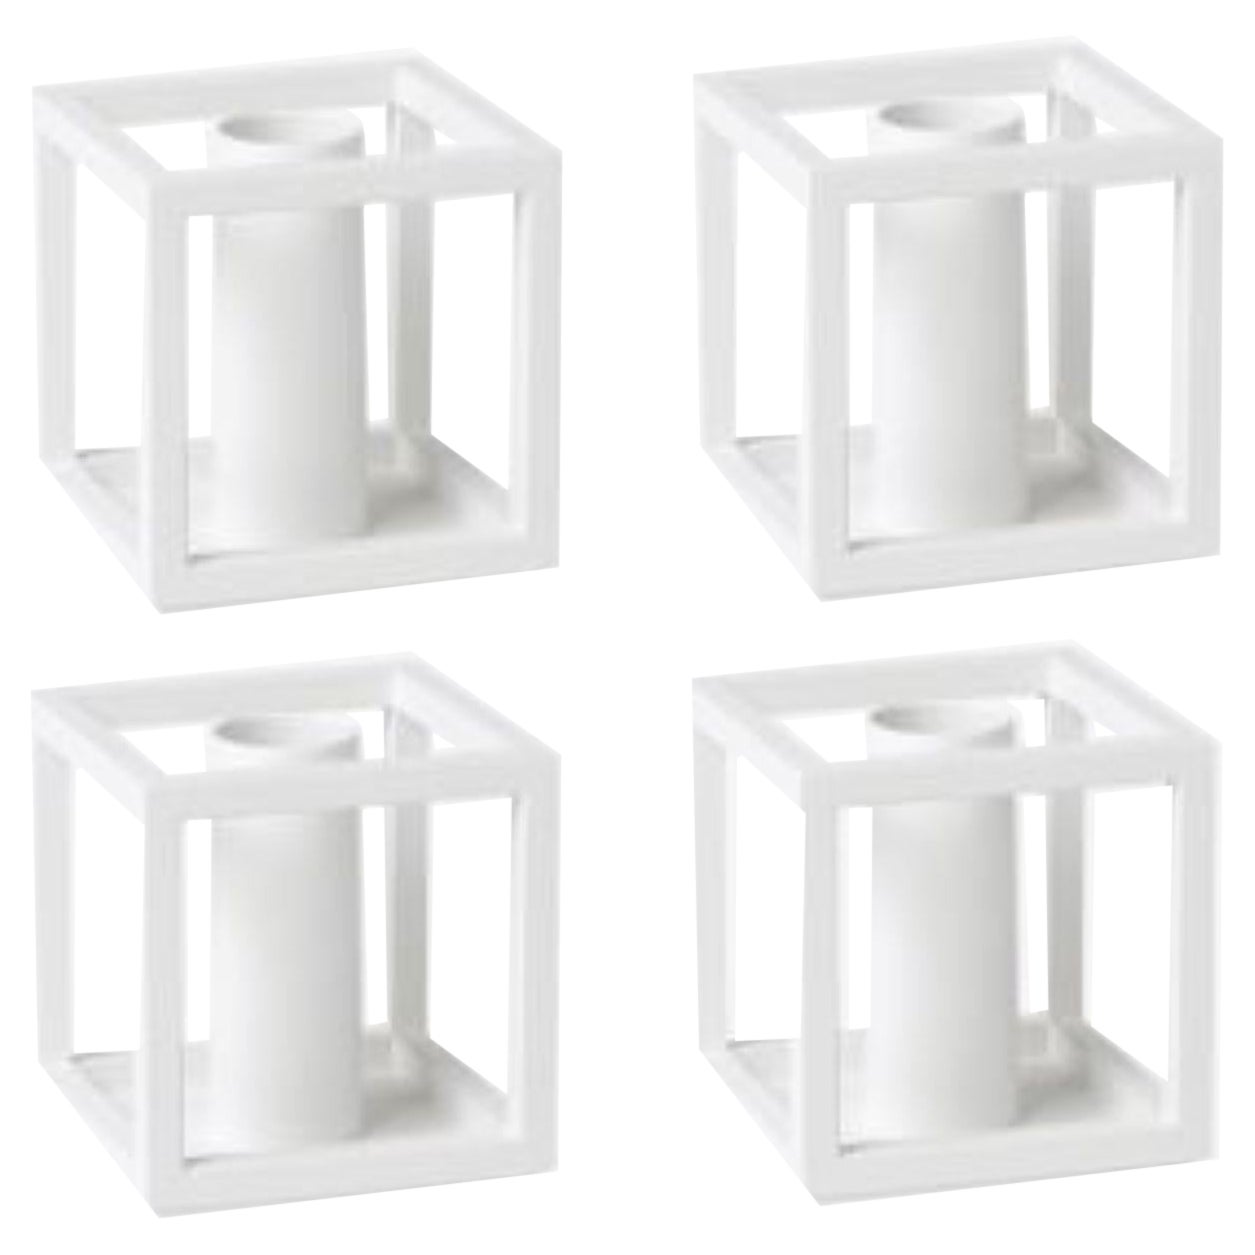 Set of 4 White Kubus 1 Candle Holders by Lassen For Sale